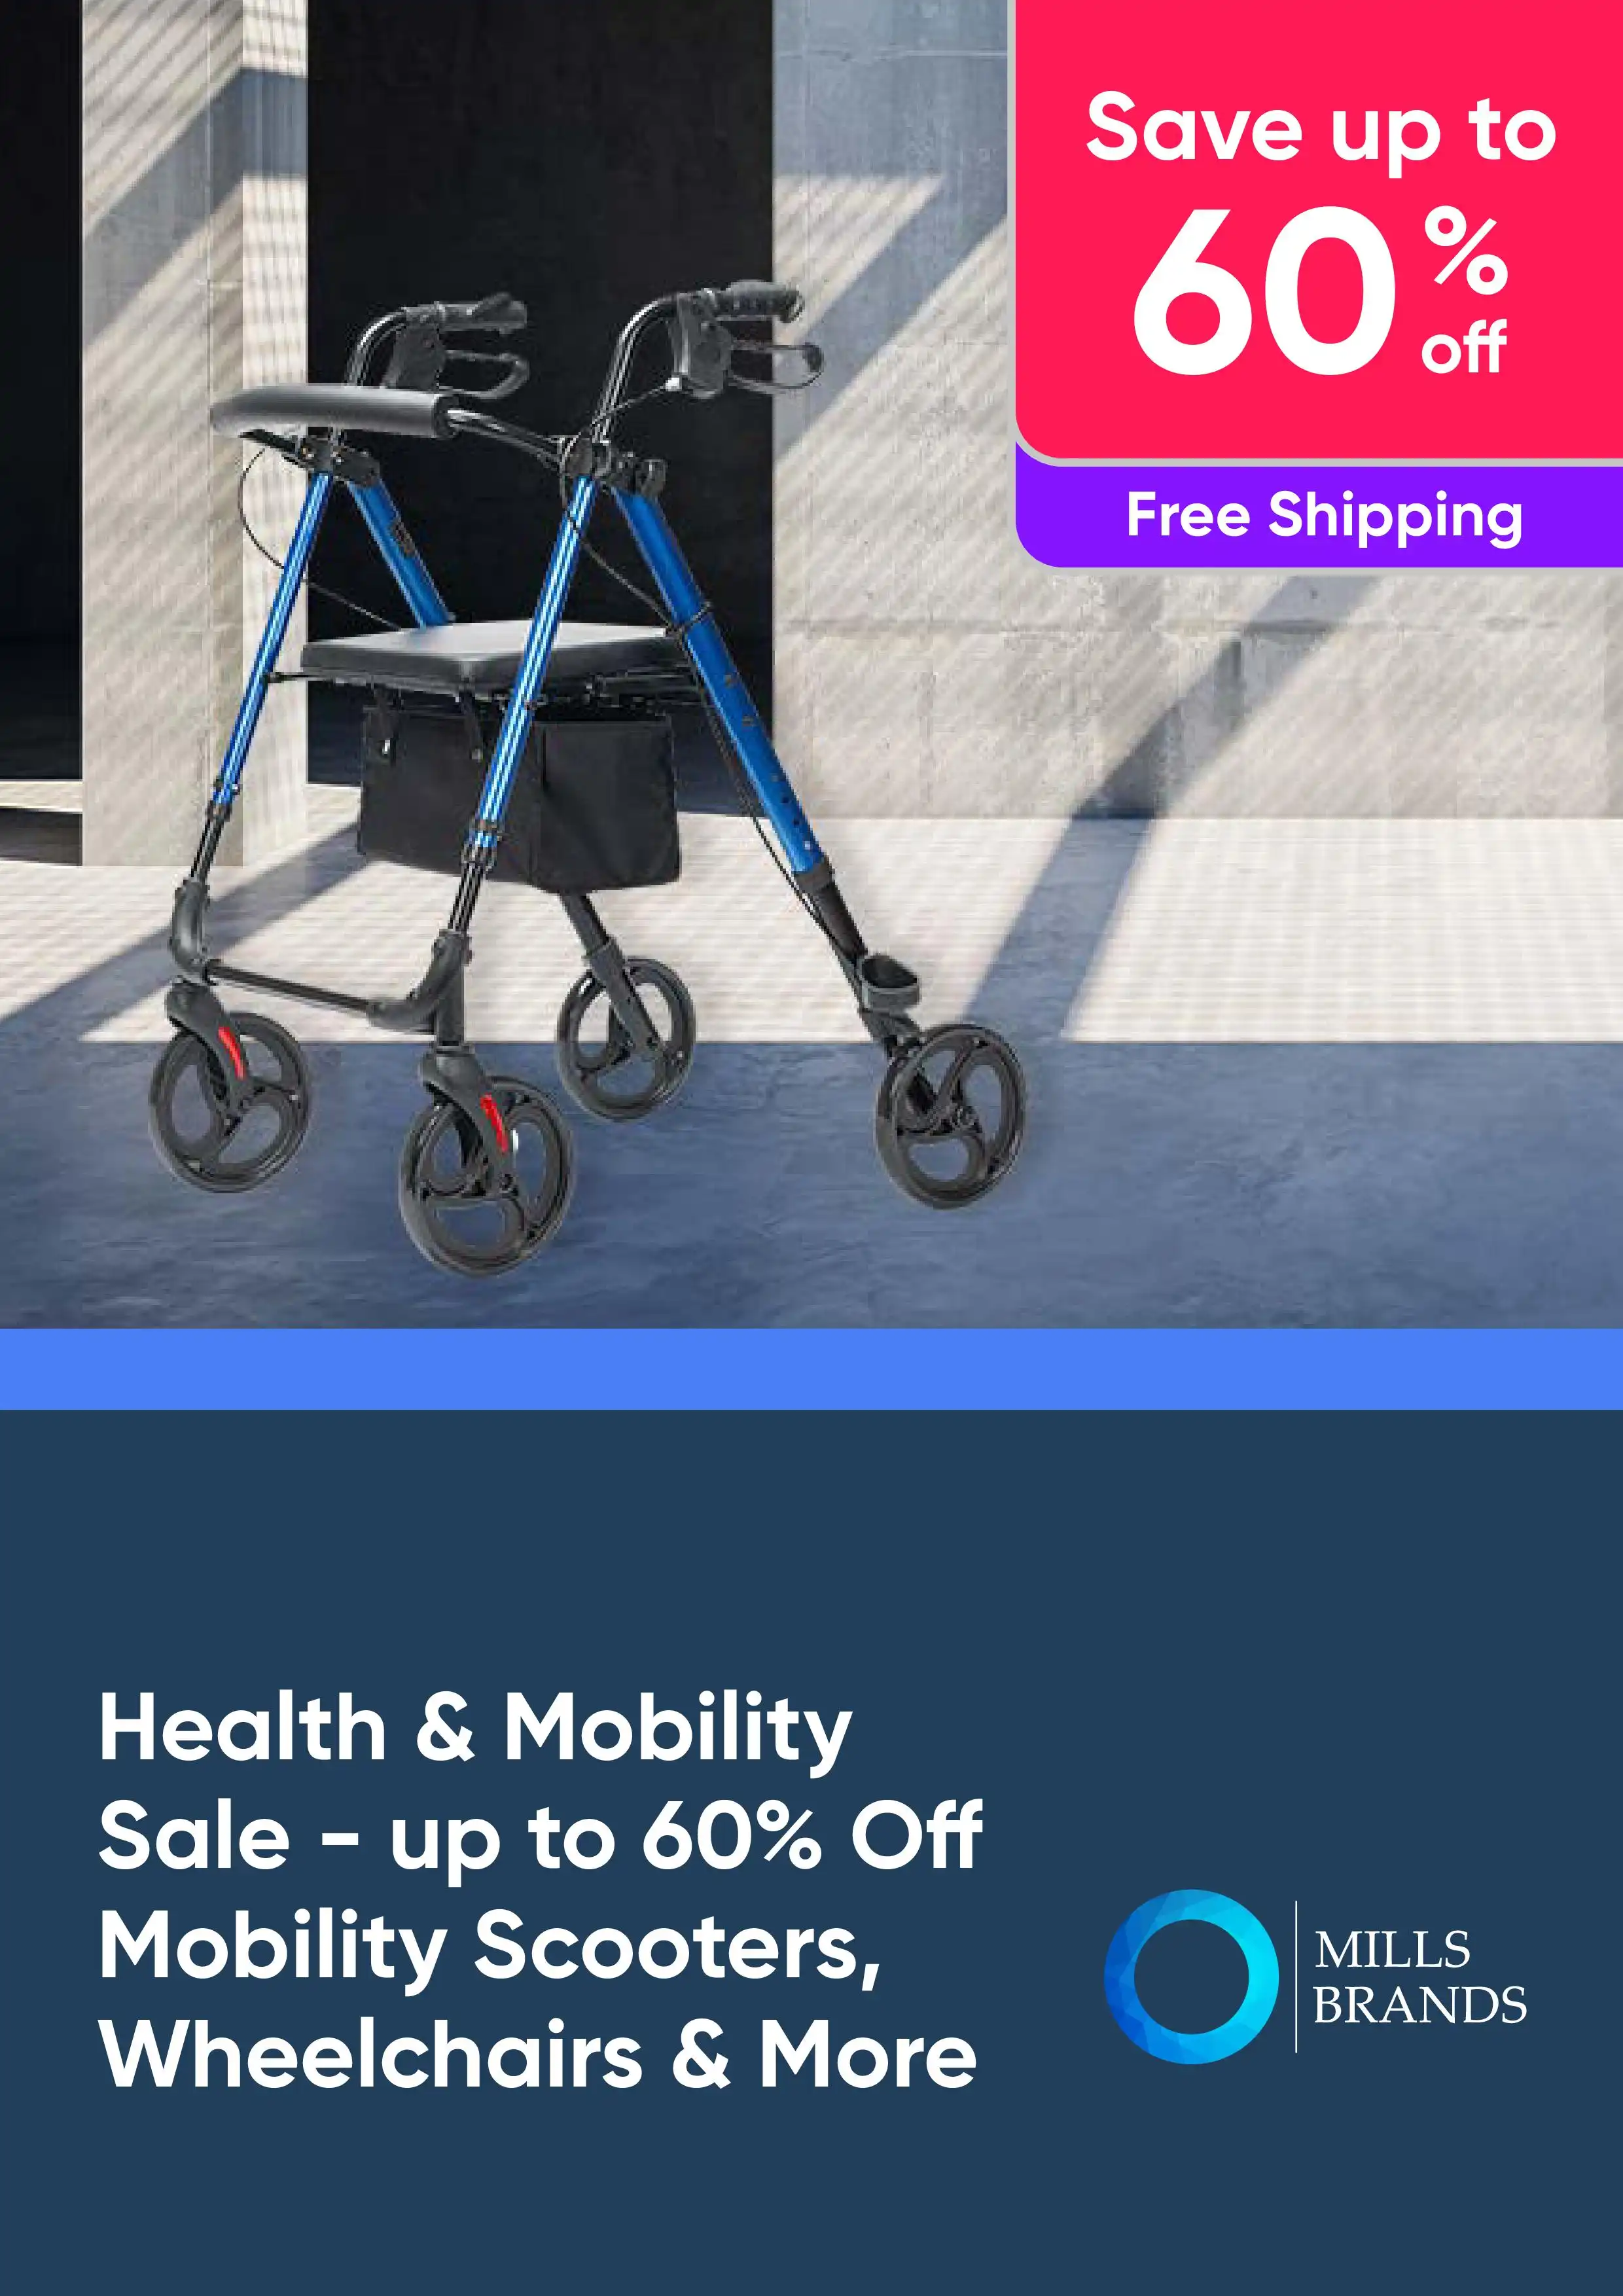 Health & Mobility Sale up to 60% Off Mobility Scooters, Wheelchairs & more